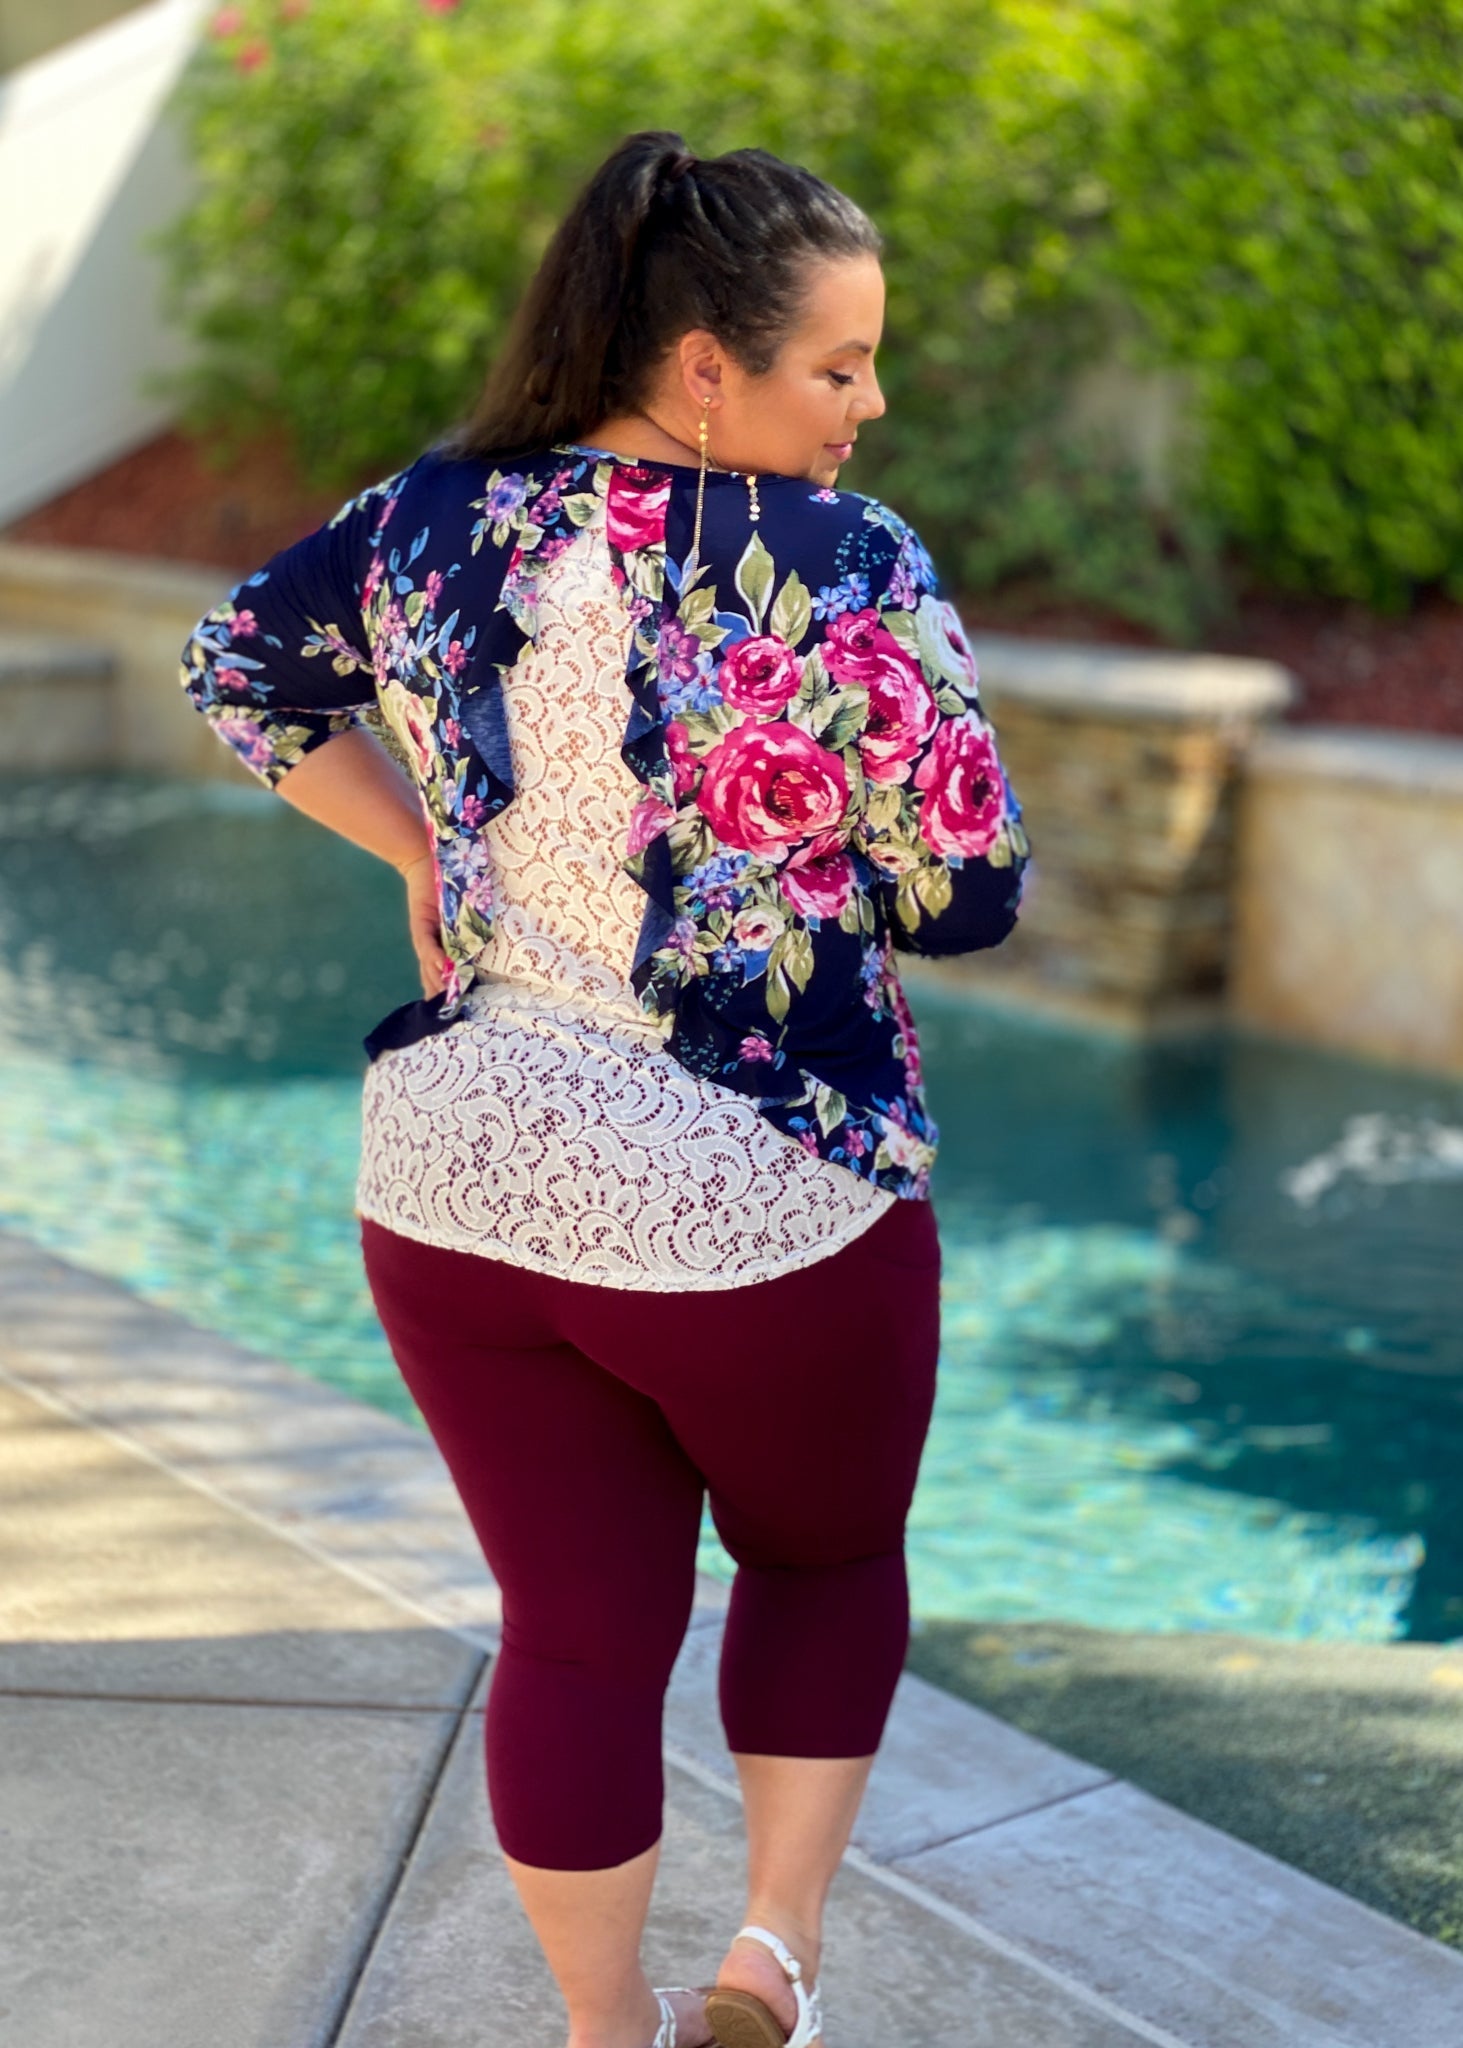 Floral Ruffles and Lace 3/4 Sleeve Top